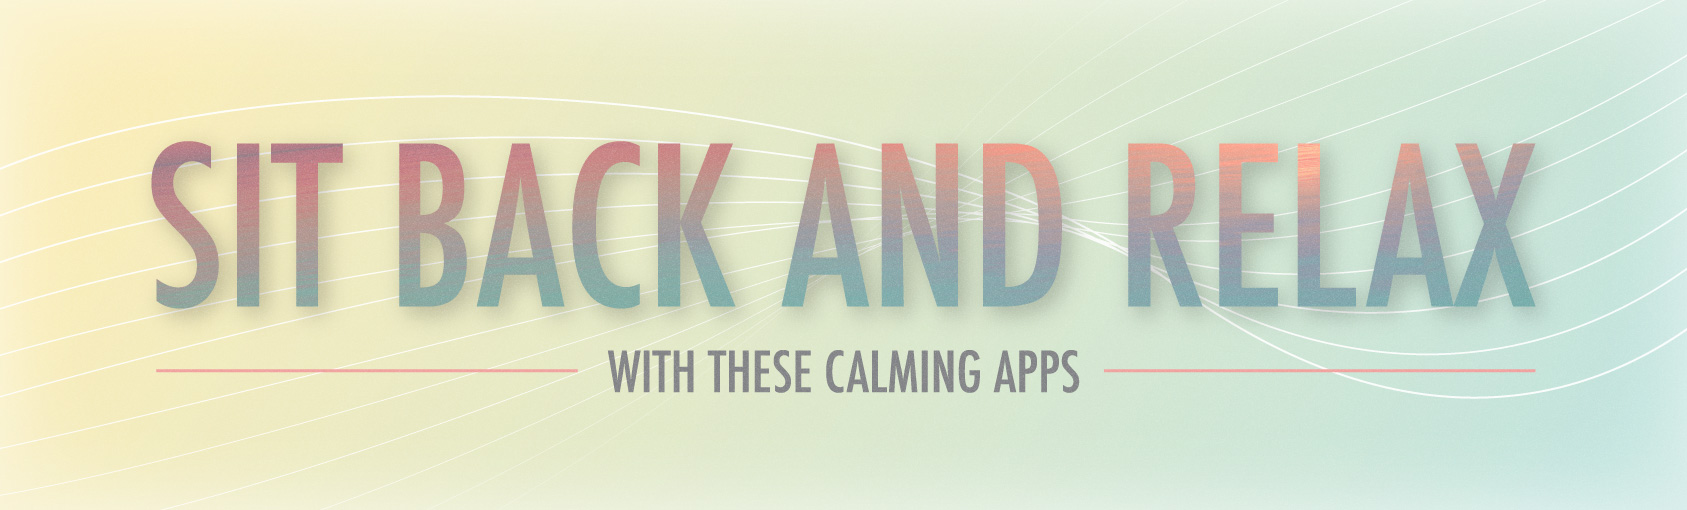 Sit back and Relax with these Calming Apps